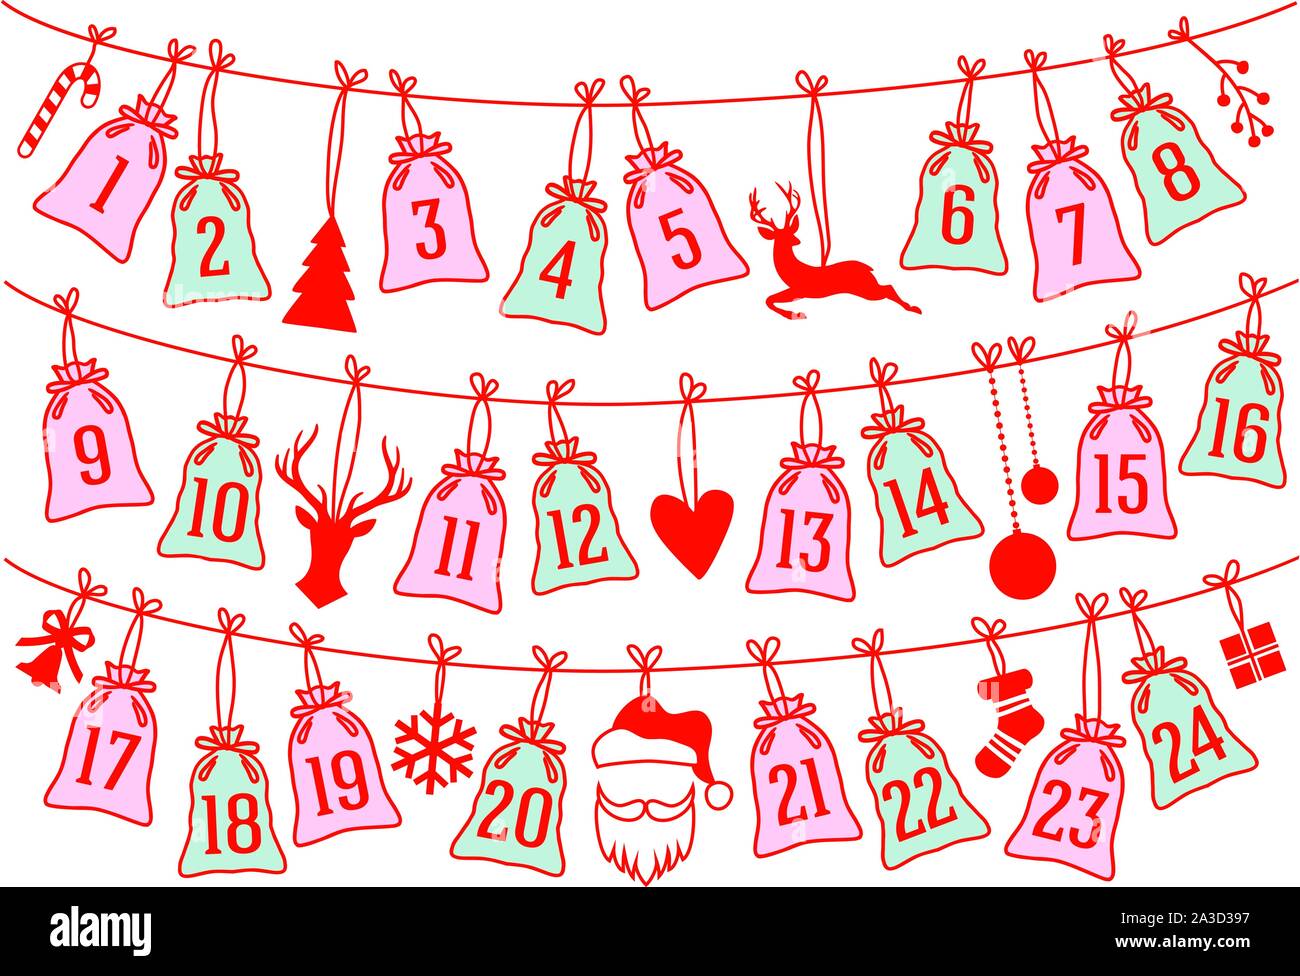 Advent calendar with Christmas bags, stocking, Santa Claus and reindeer, set of vector design elements Stock Vector